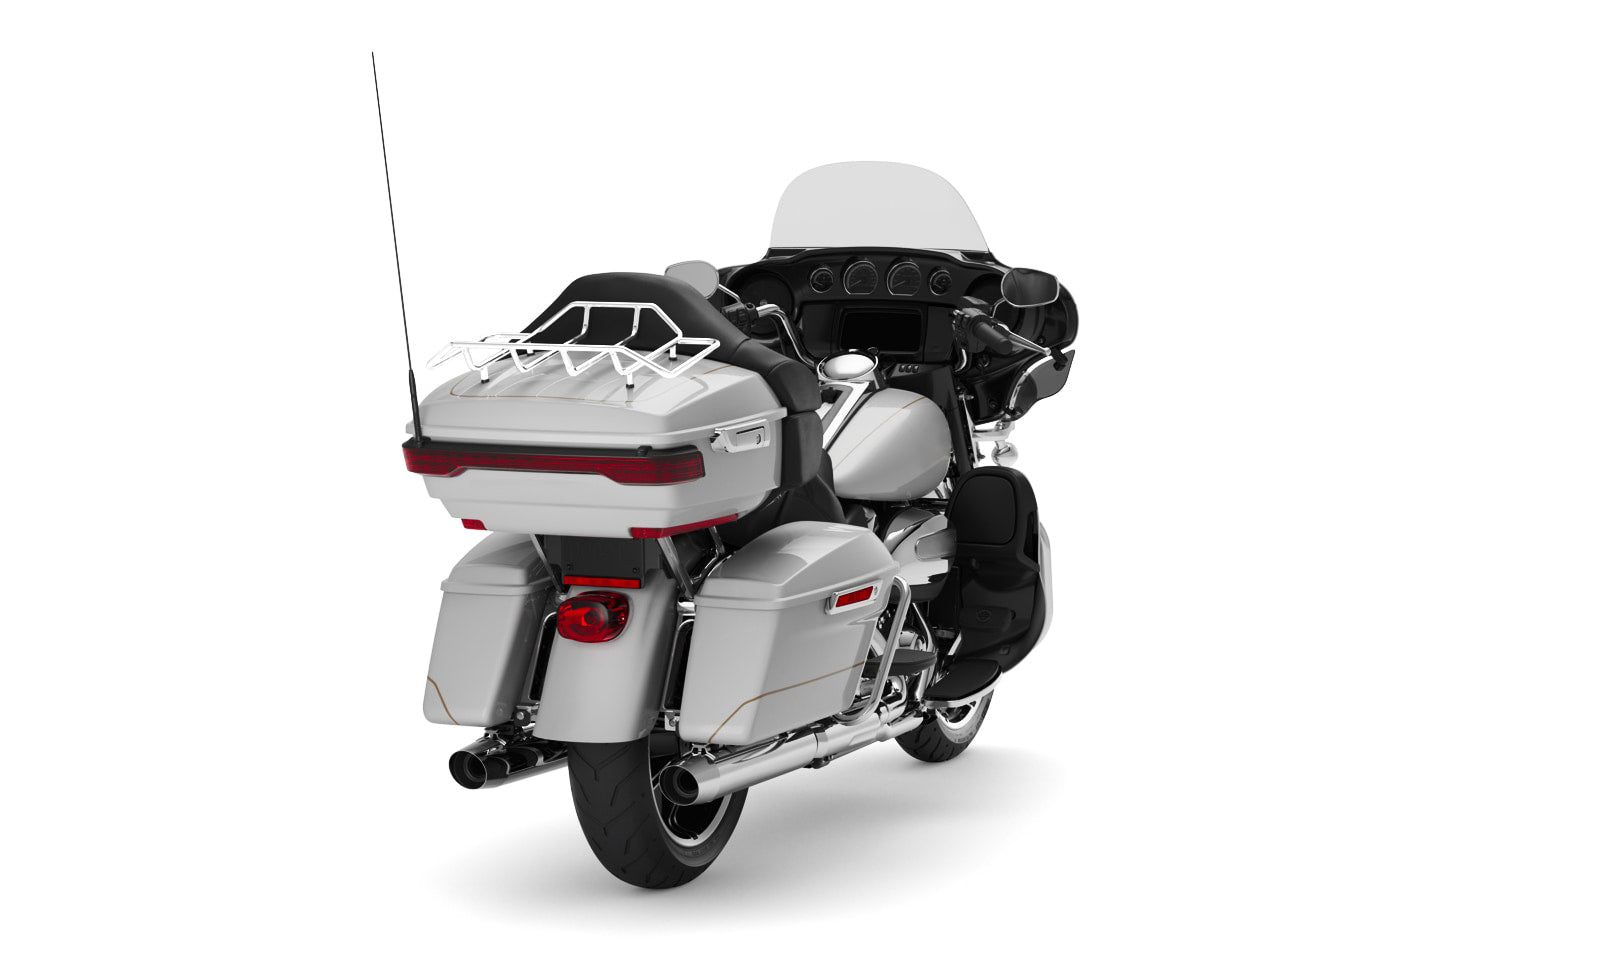 Viking Voyage Tour Pack Luggage Rack for Harley Electra Glide Chrome Bag on Bike View @expand